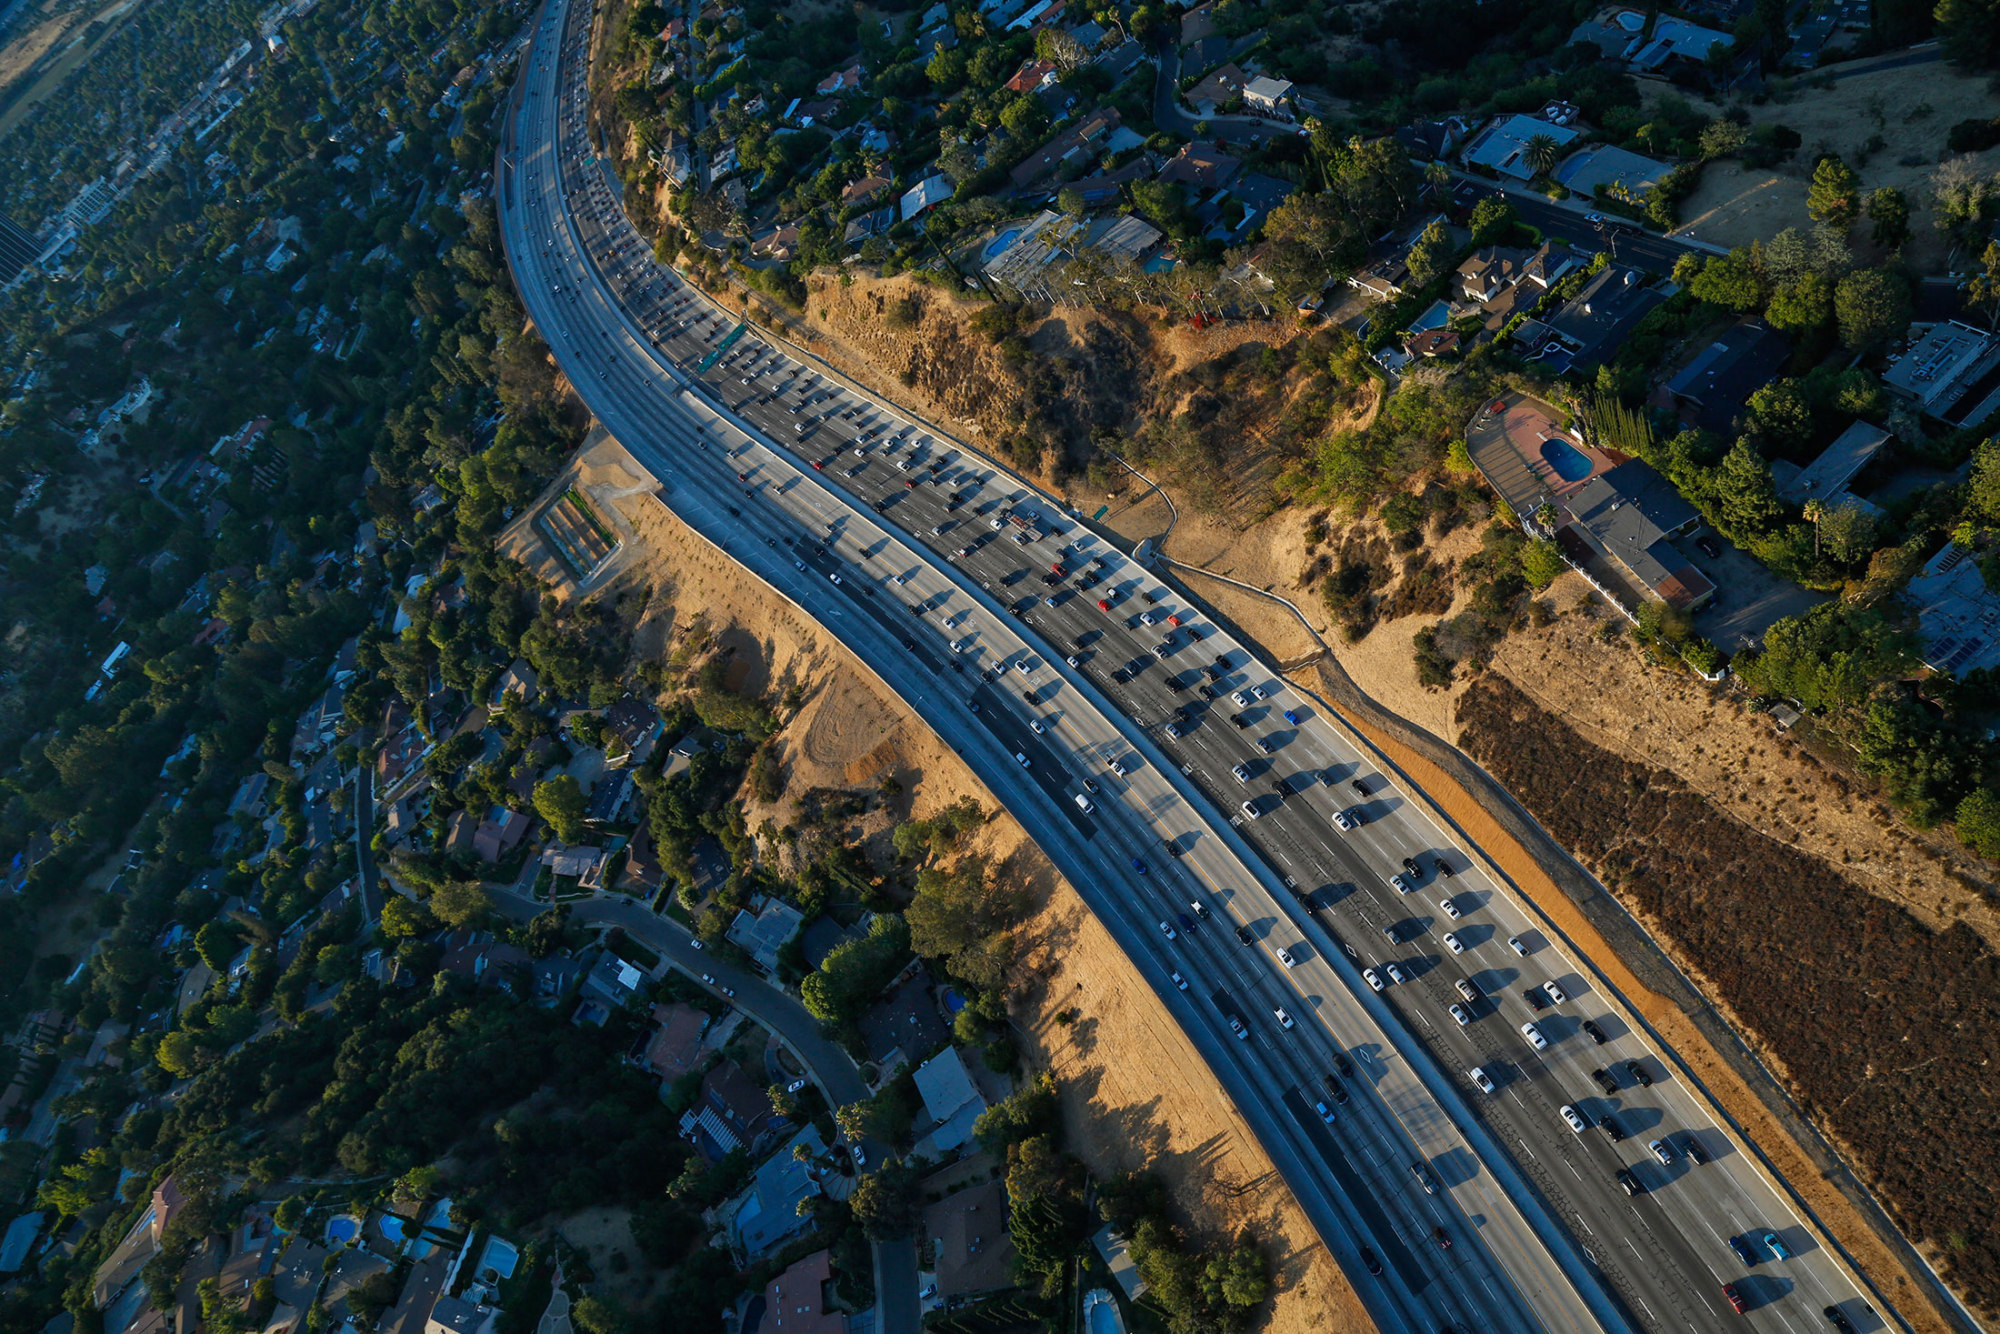 Rush hour traffic on the 405 Freeway in Los Angeles.
